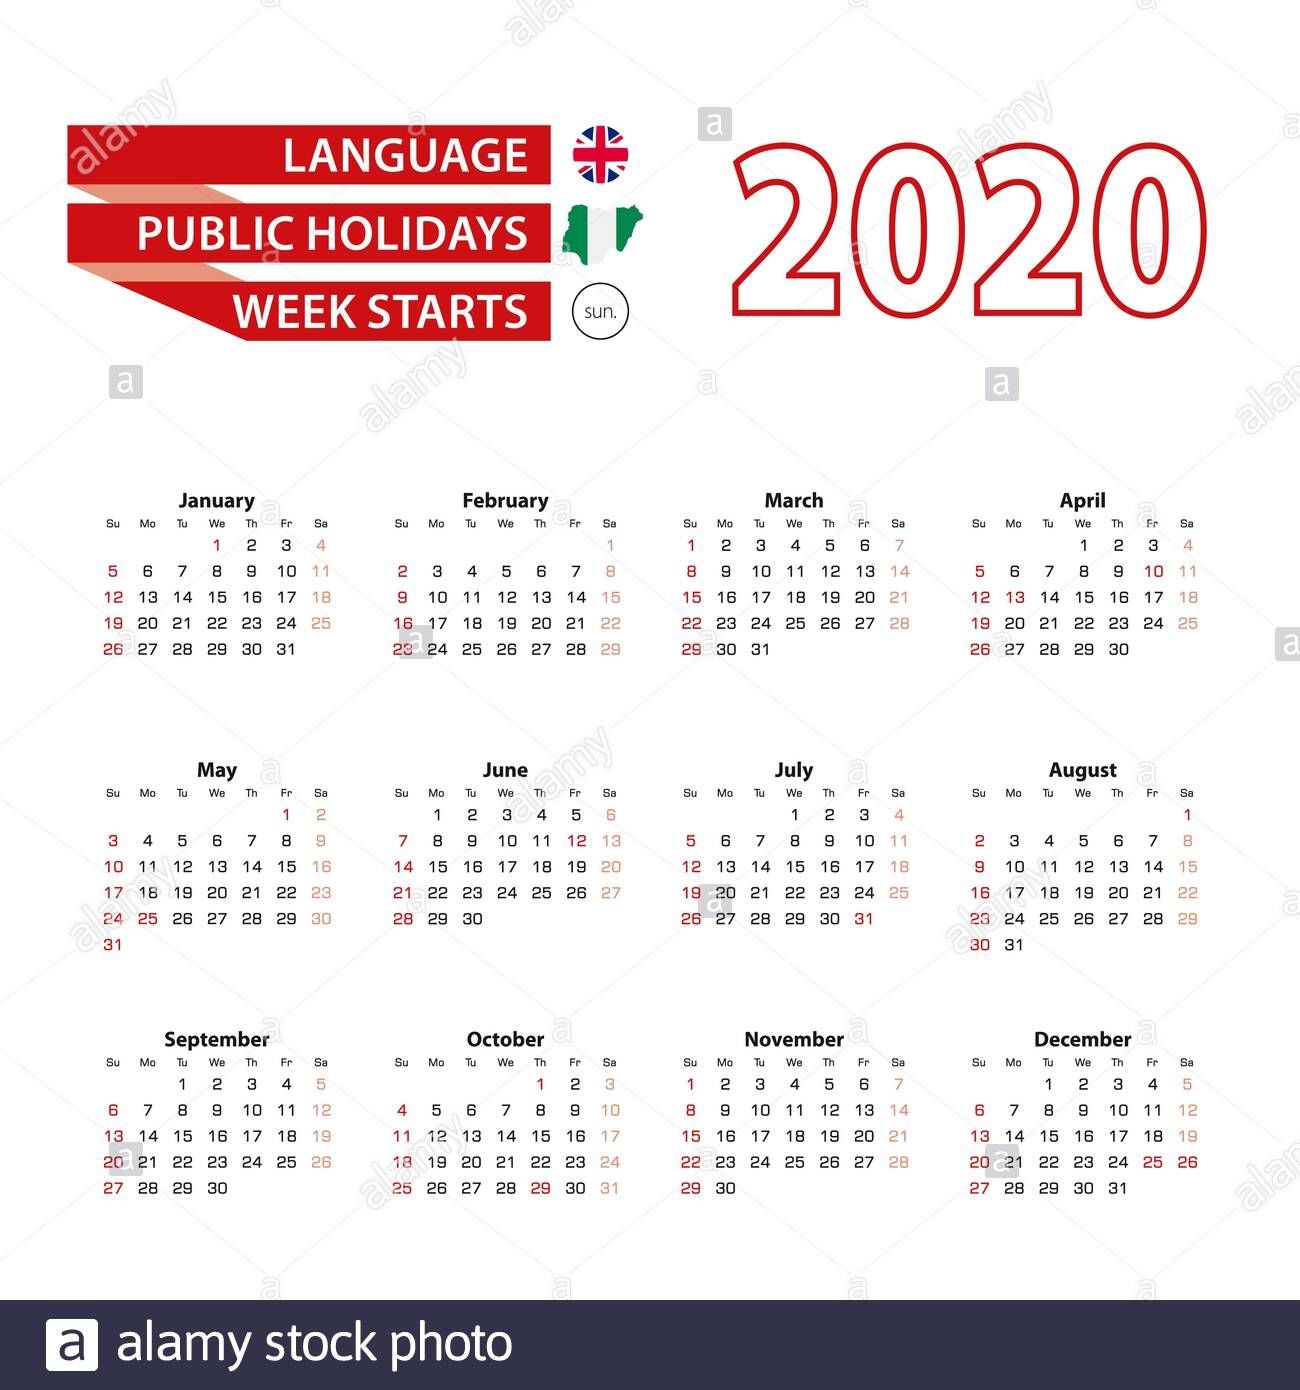 Calendar 2020 In English Language With Public Holidays The